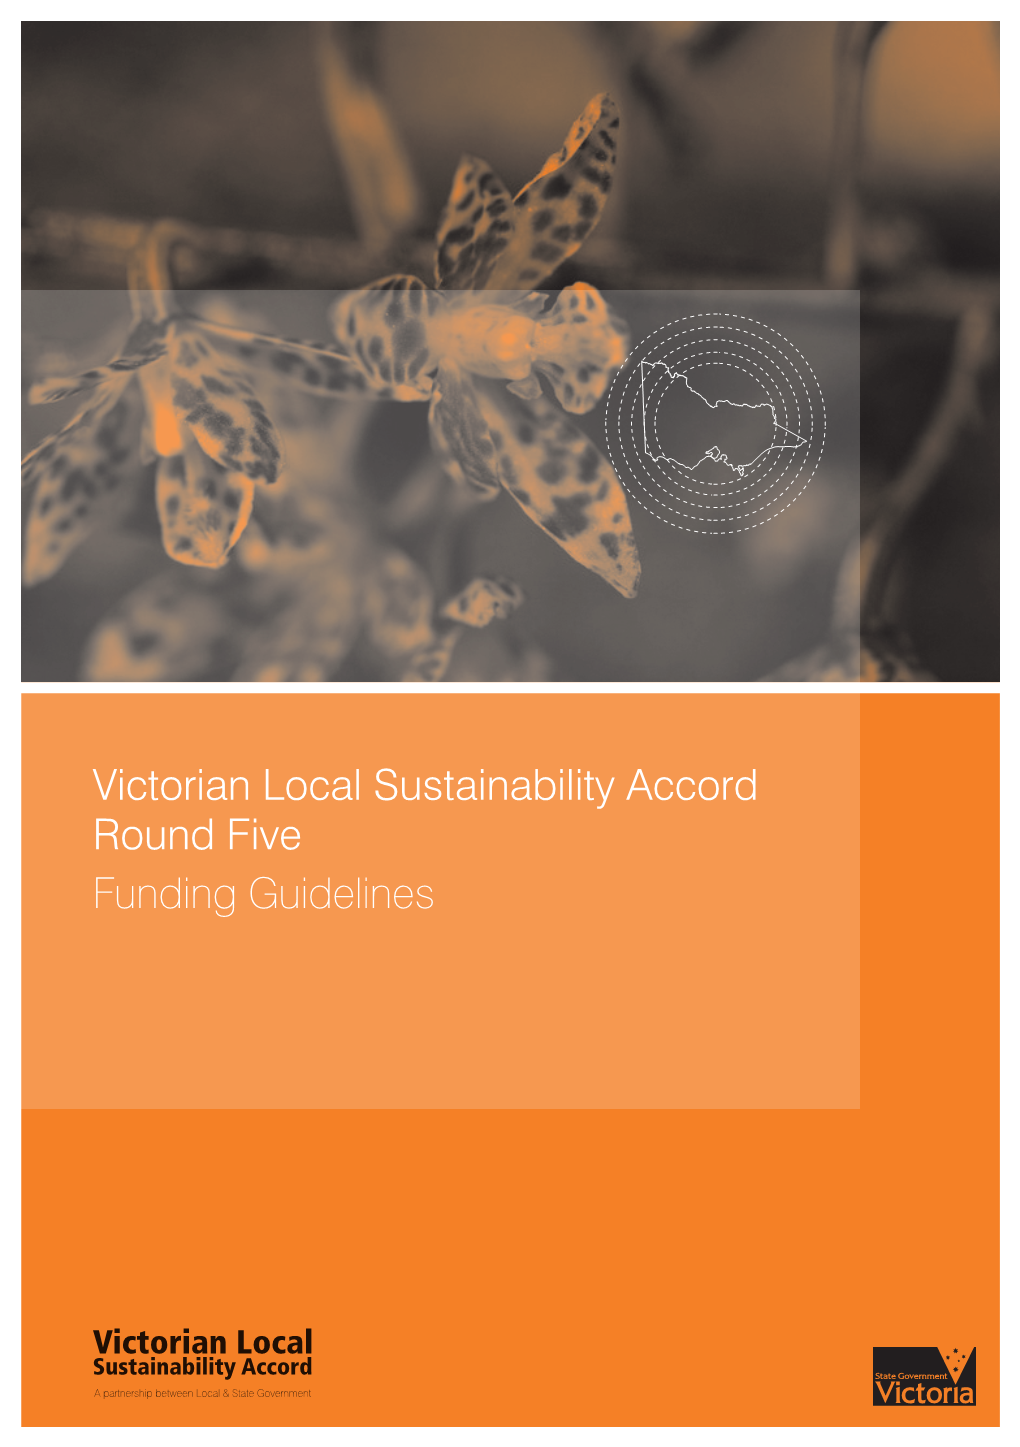 Victorian Local Sustainability Accord Round Five Funding Guidelines